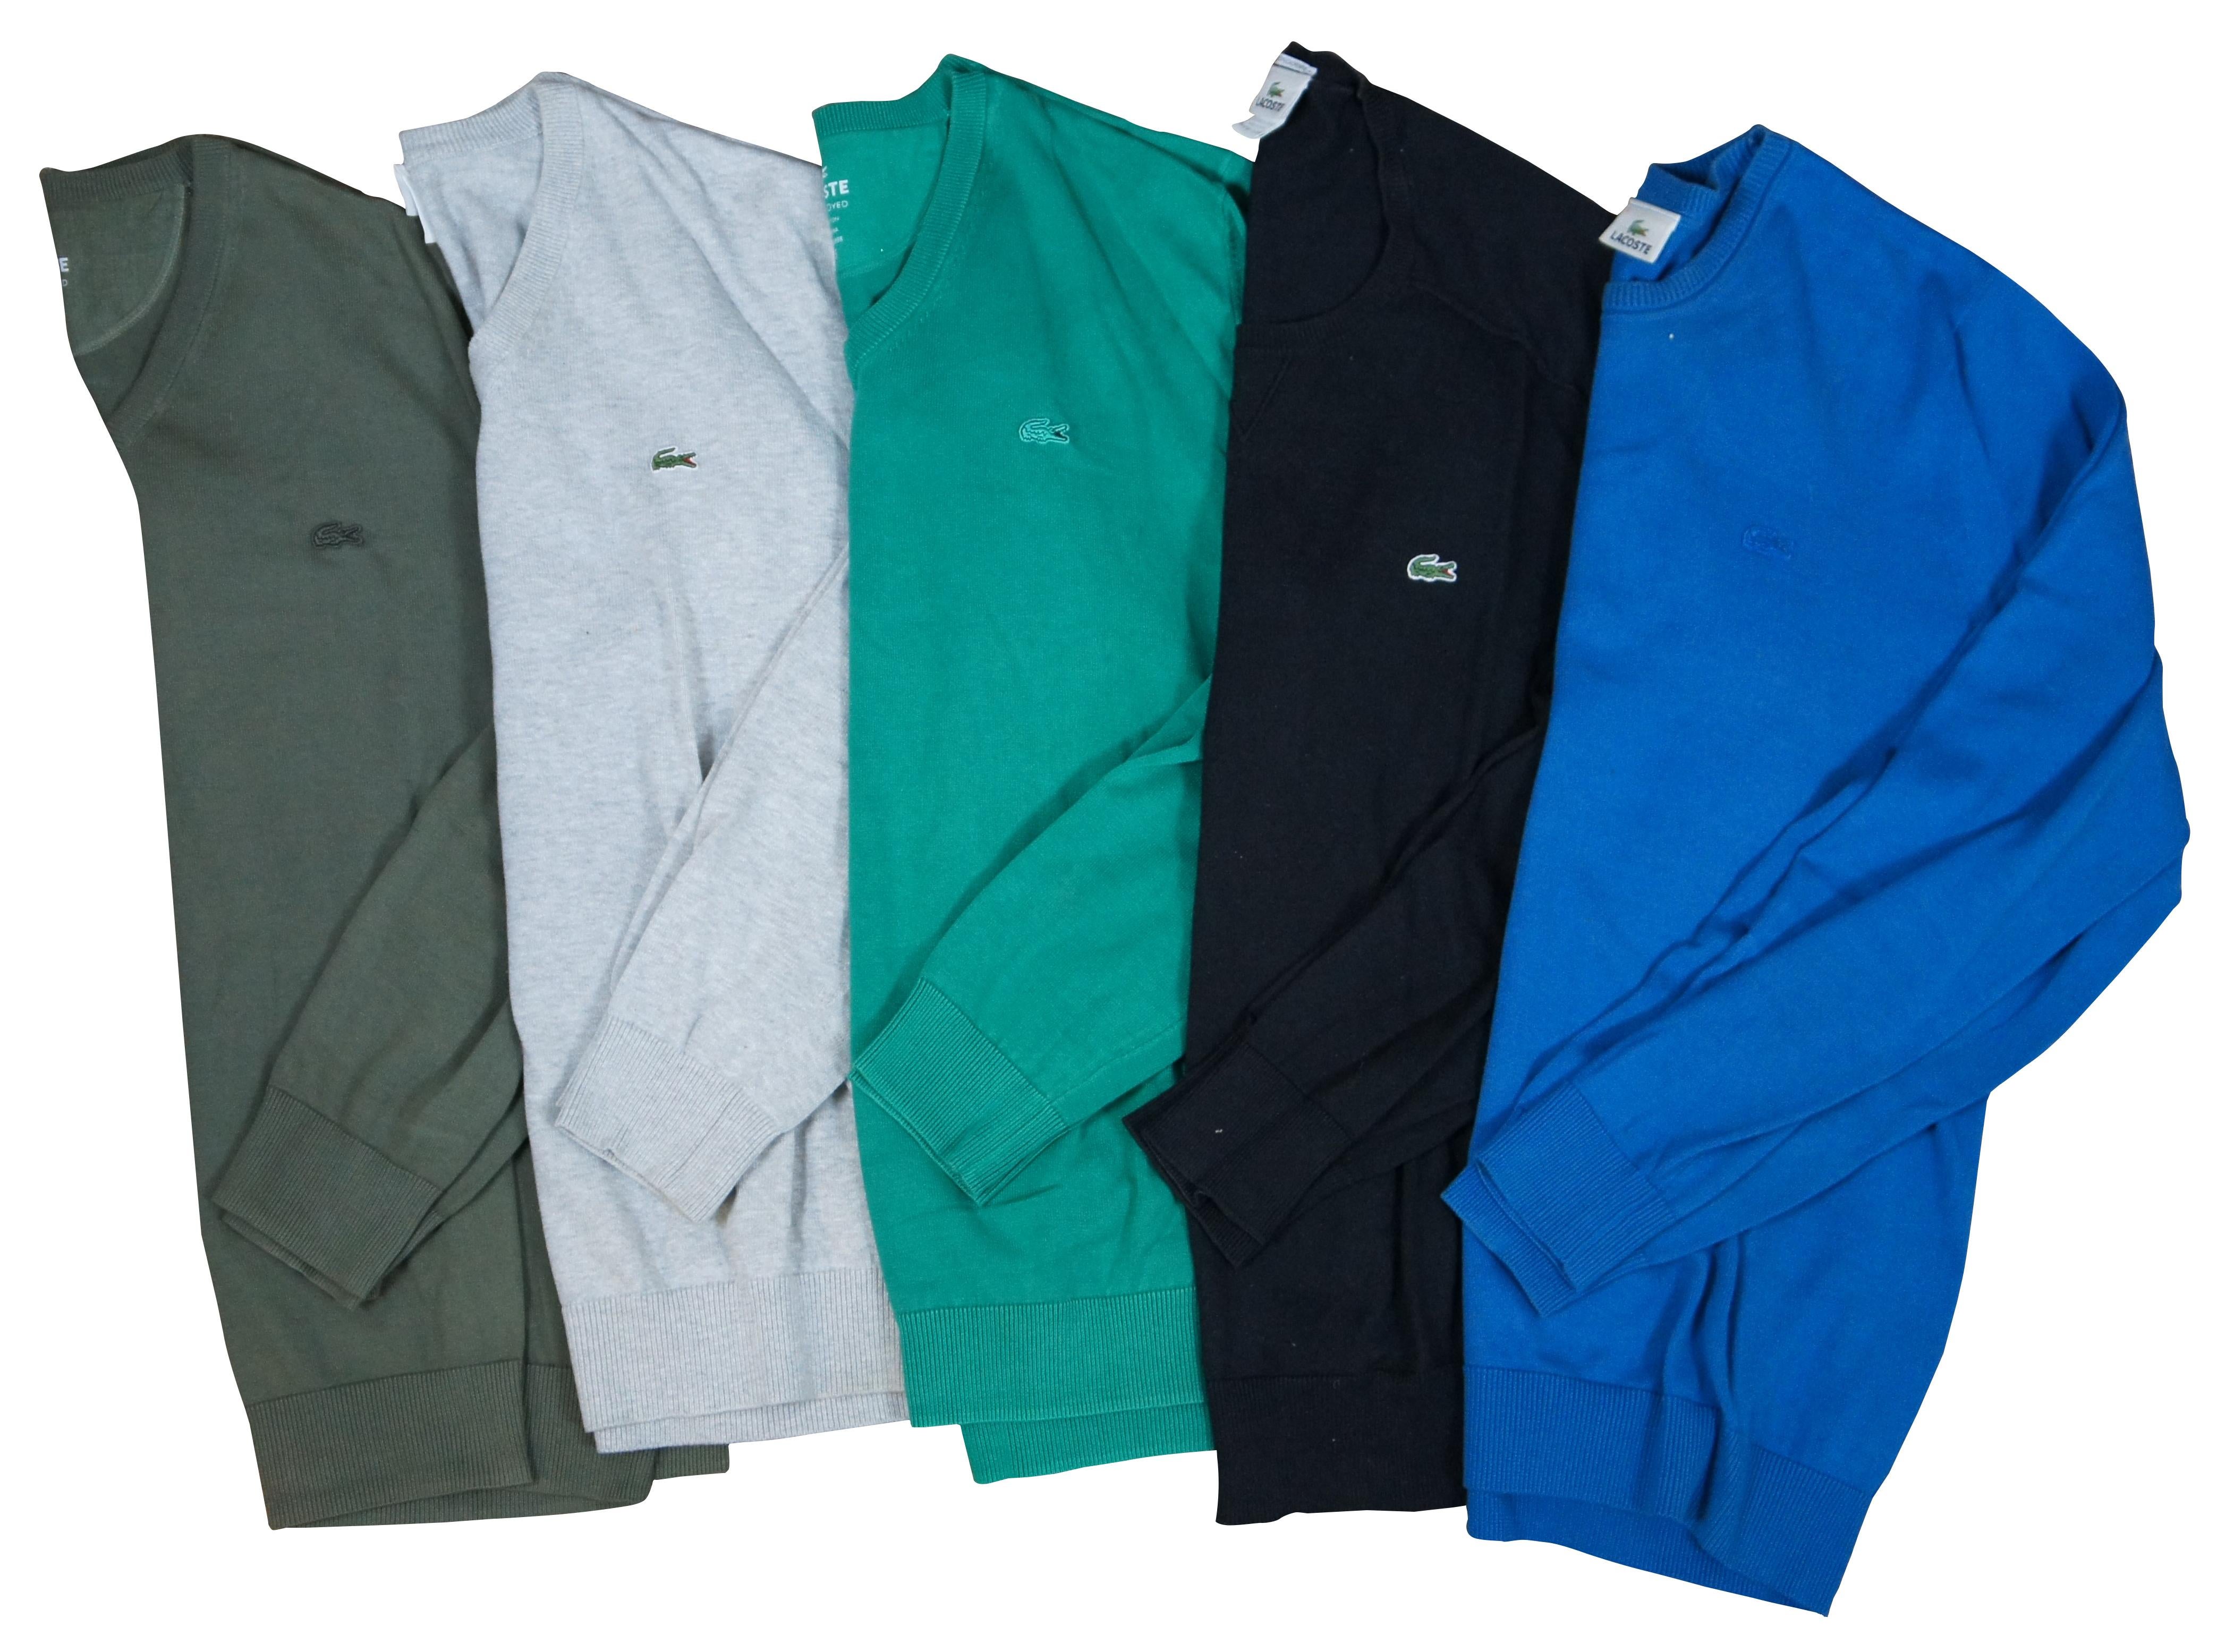 Lot of five Lacoste mens long sleeve pull over cotton sweaters, three V neck and 2 crew neck; colors include olive green, light gray, kelly green, black and blue.

Size 5 / Large / Shoulders - 17.5” / Arm Length - 27” / Chest - 46” / Back Length –